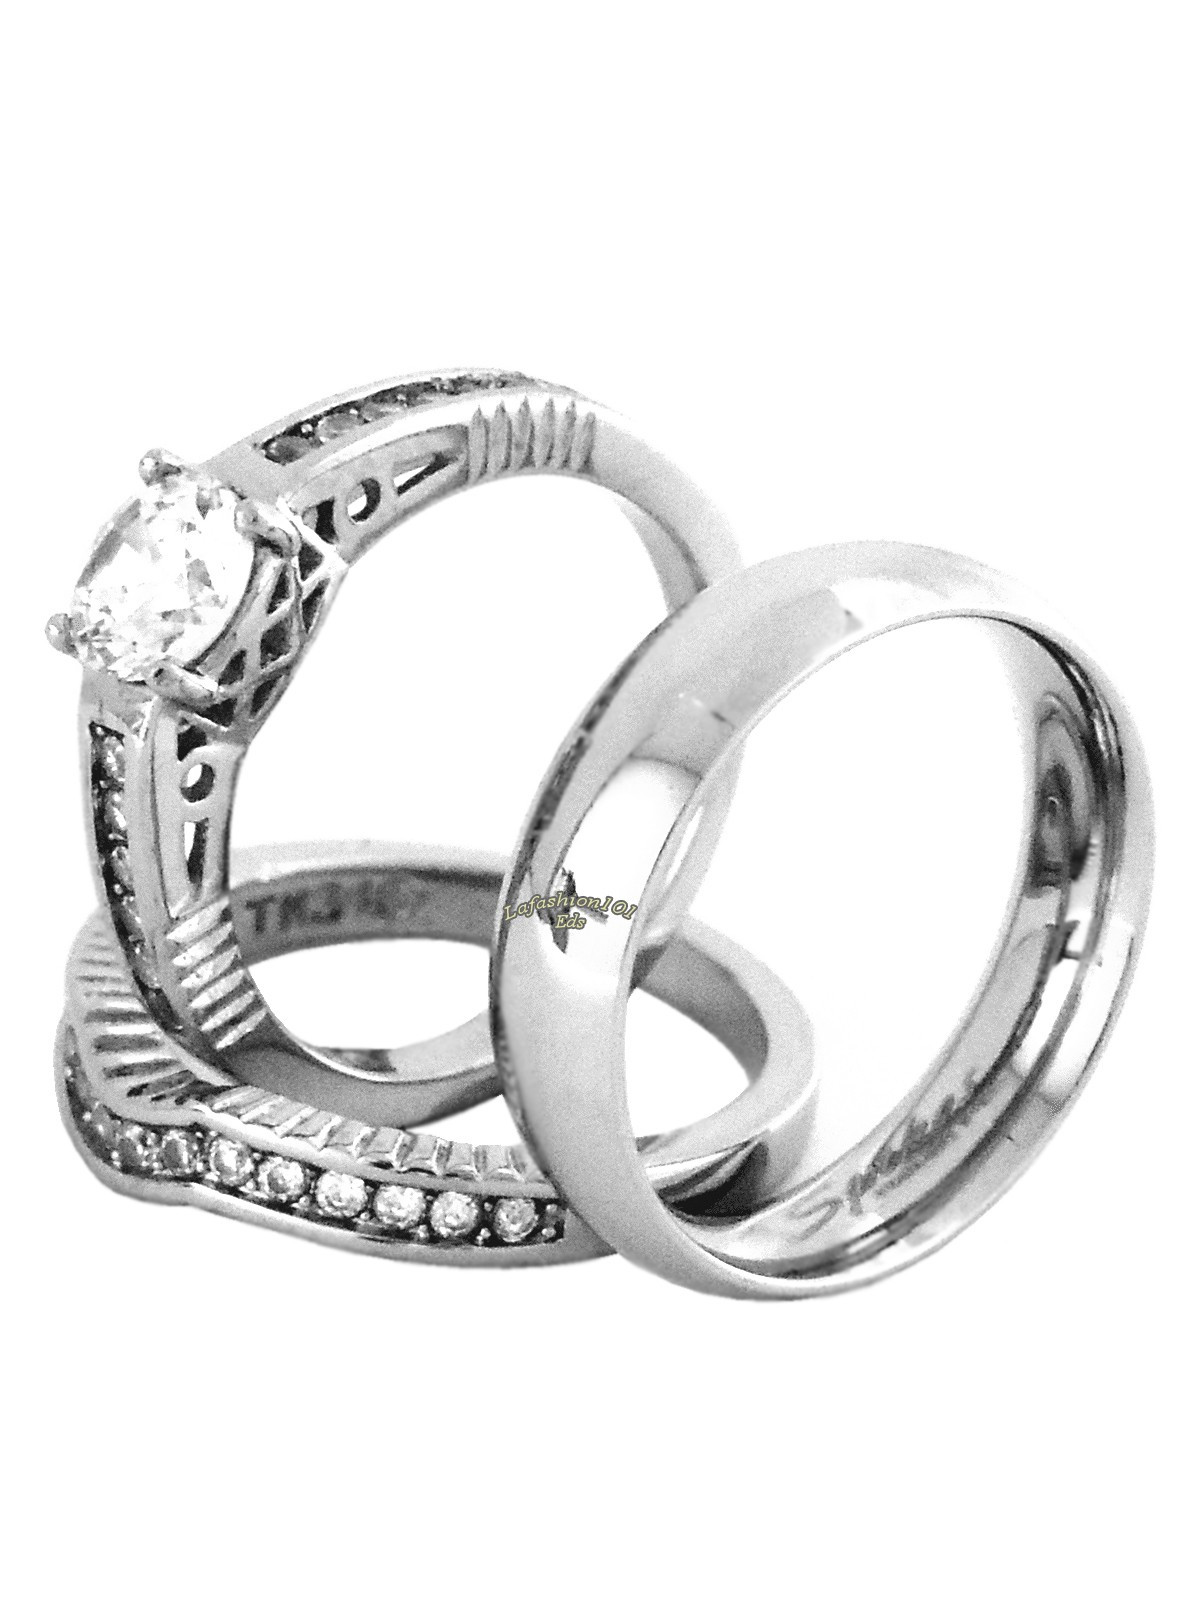 Wedding Rings Sets At Walmart
 His Hers Couple Lovers Stainless Steel Wedding Ring Set